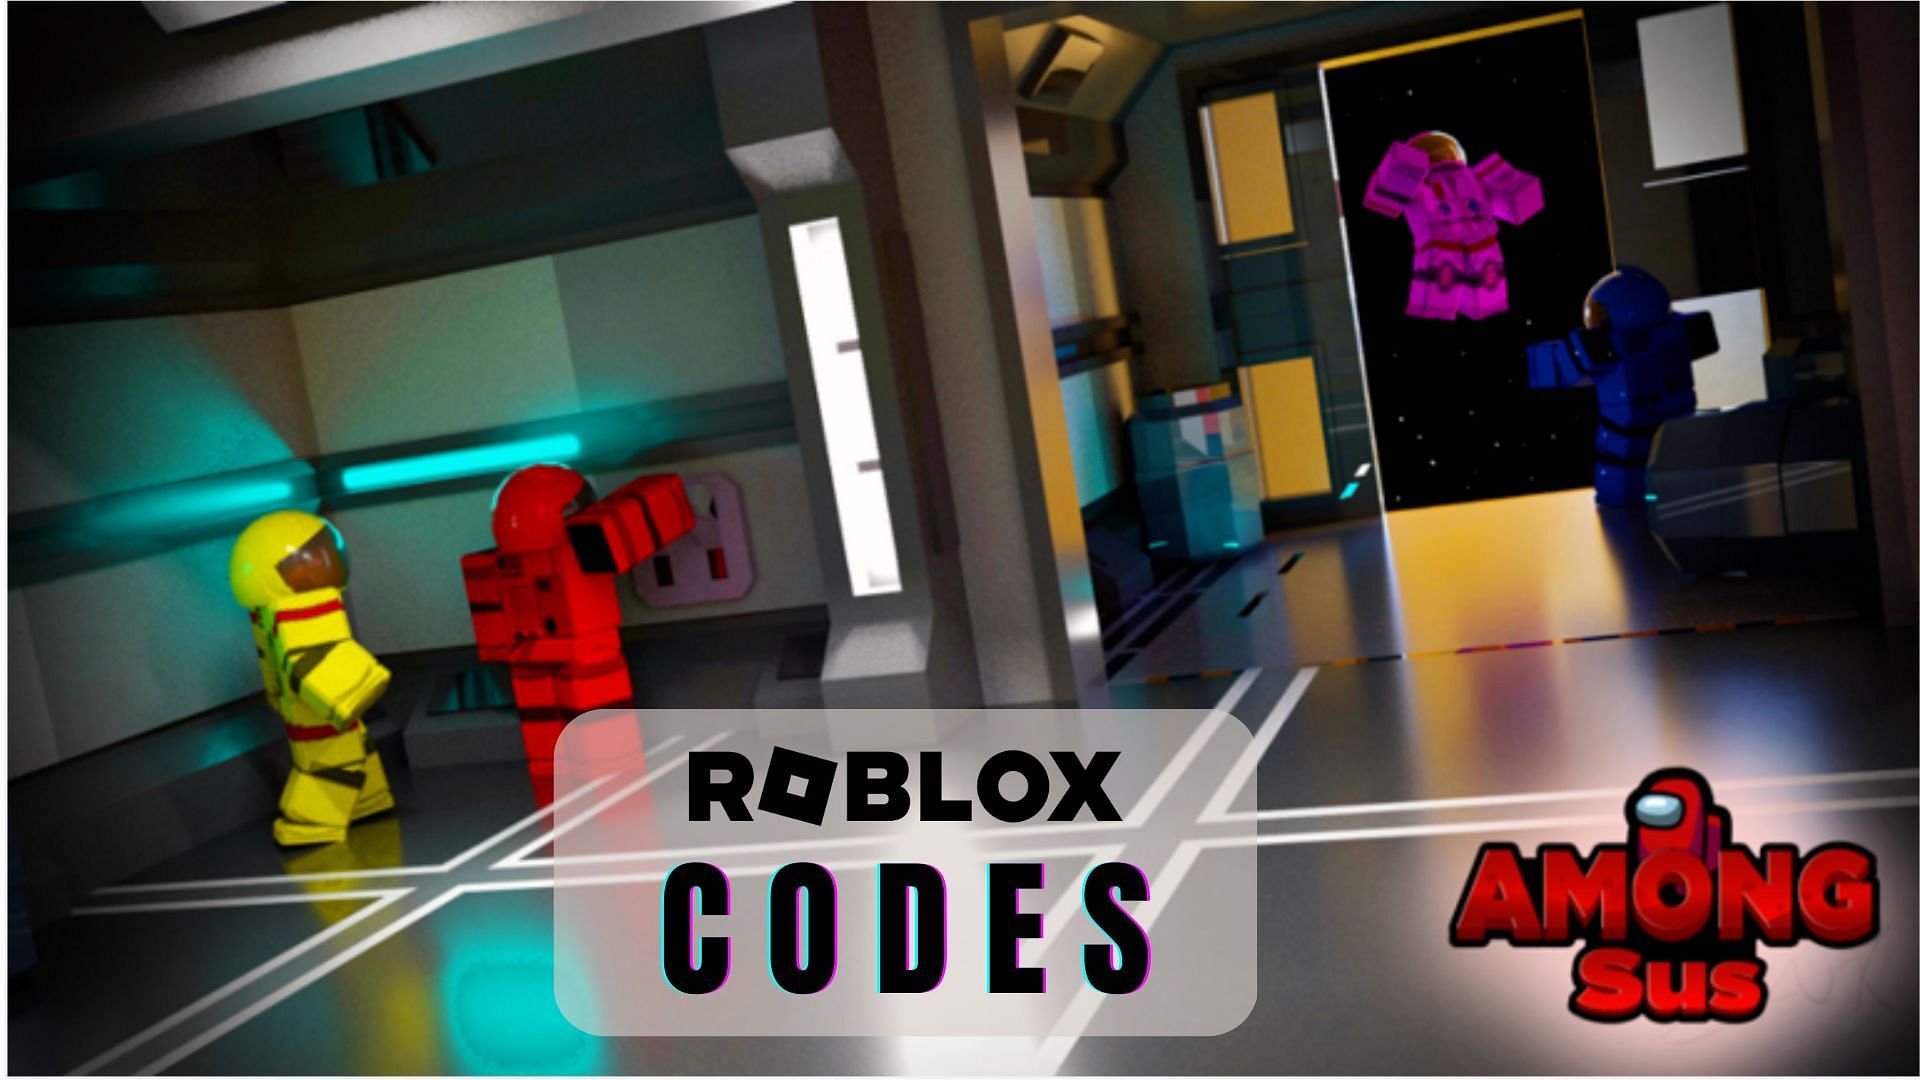 Roblox Among Sus codes in February 2023.